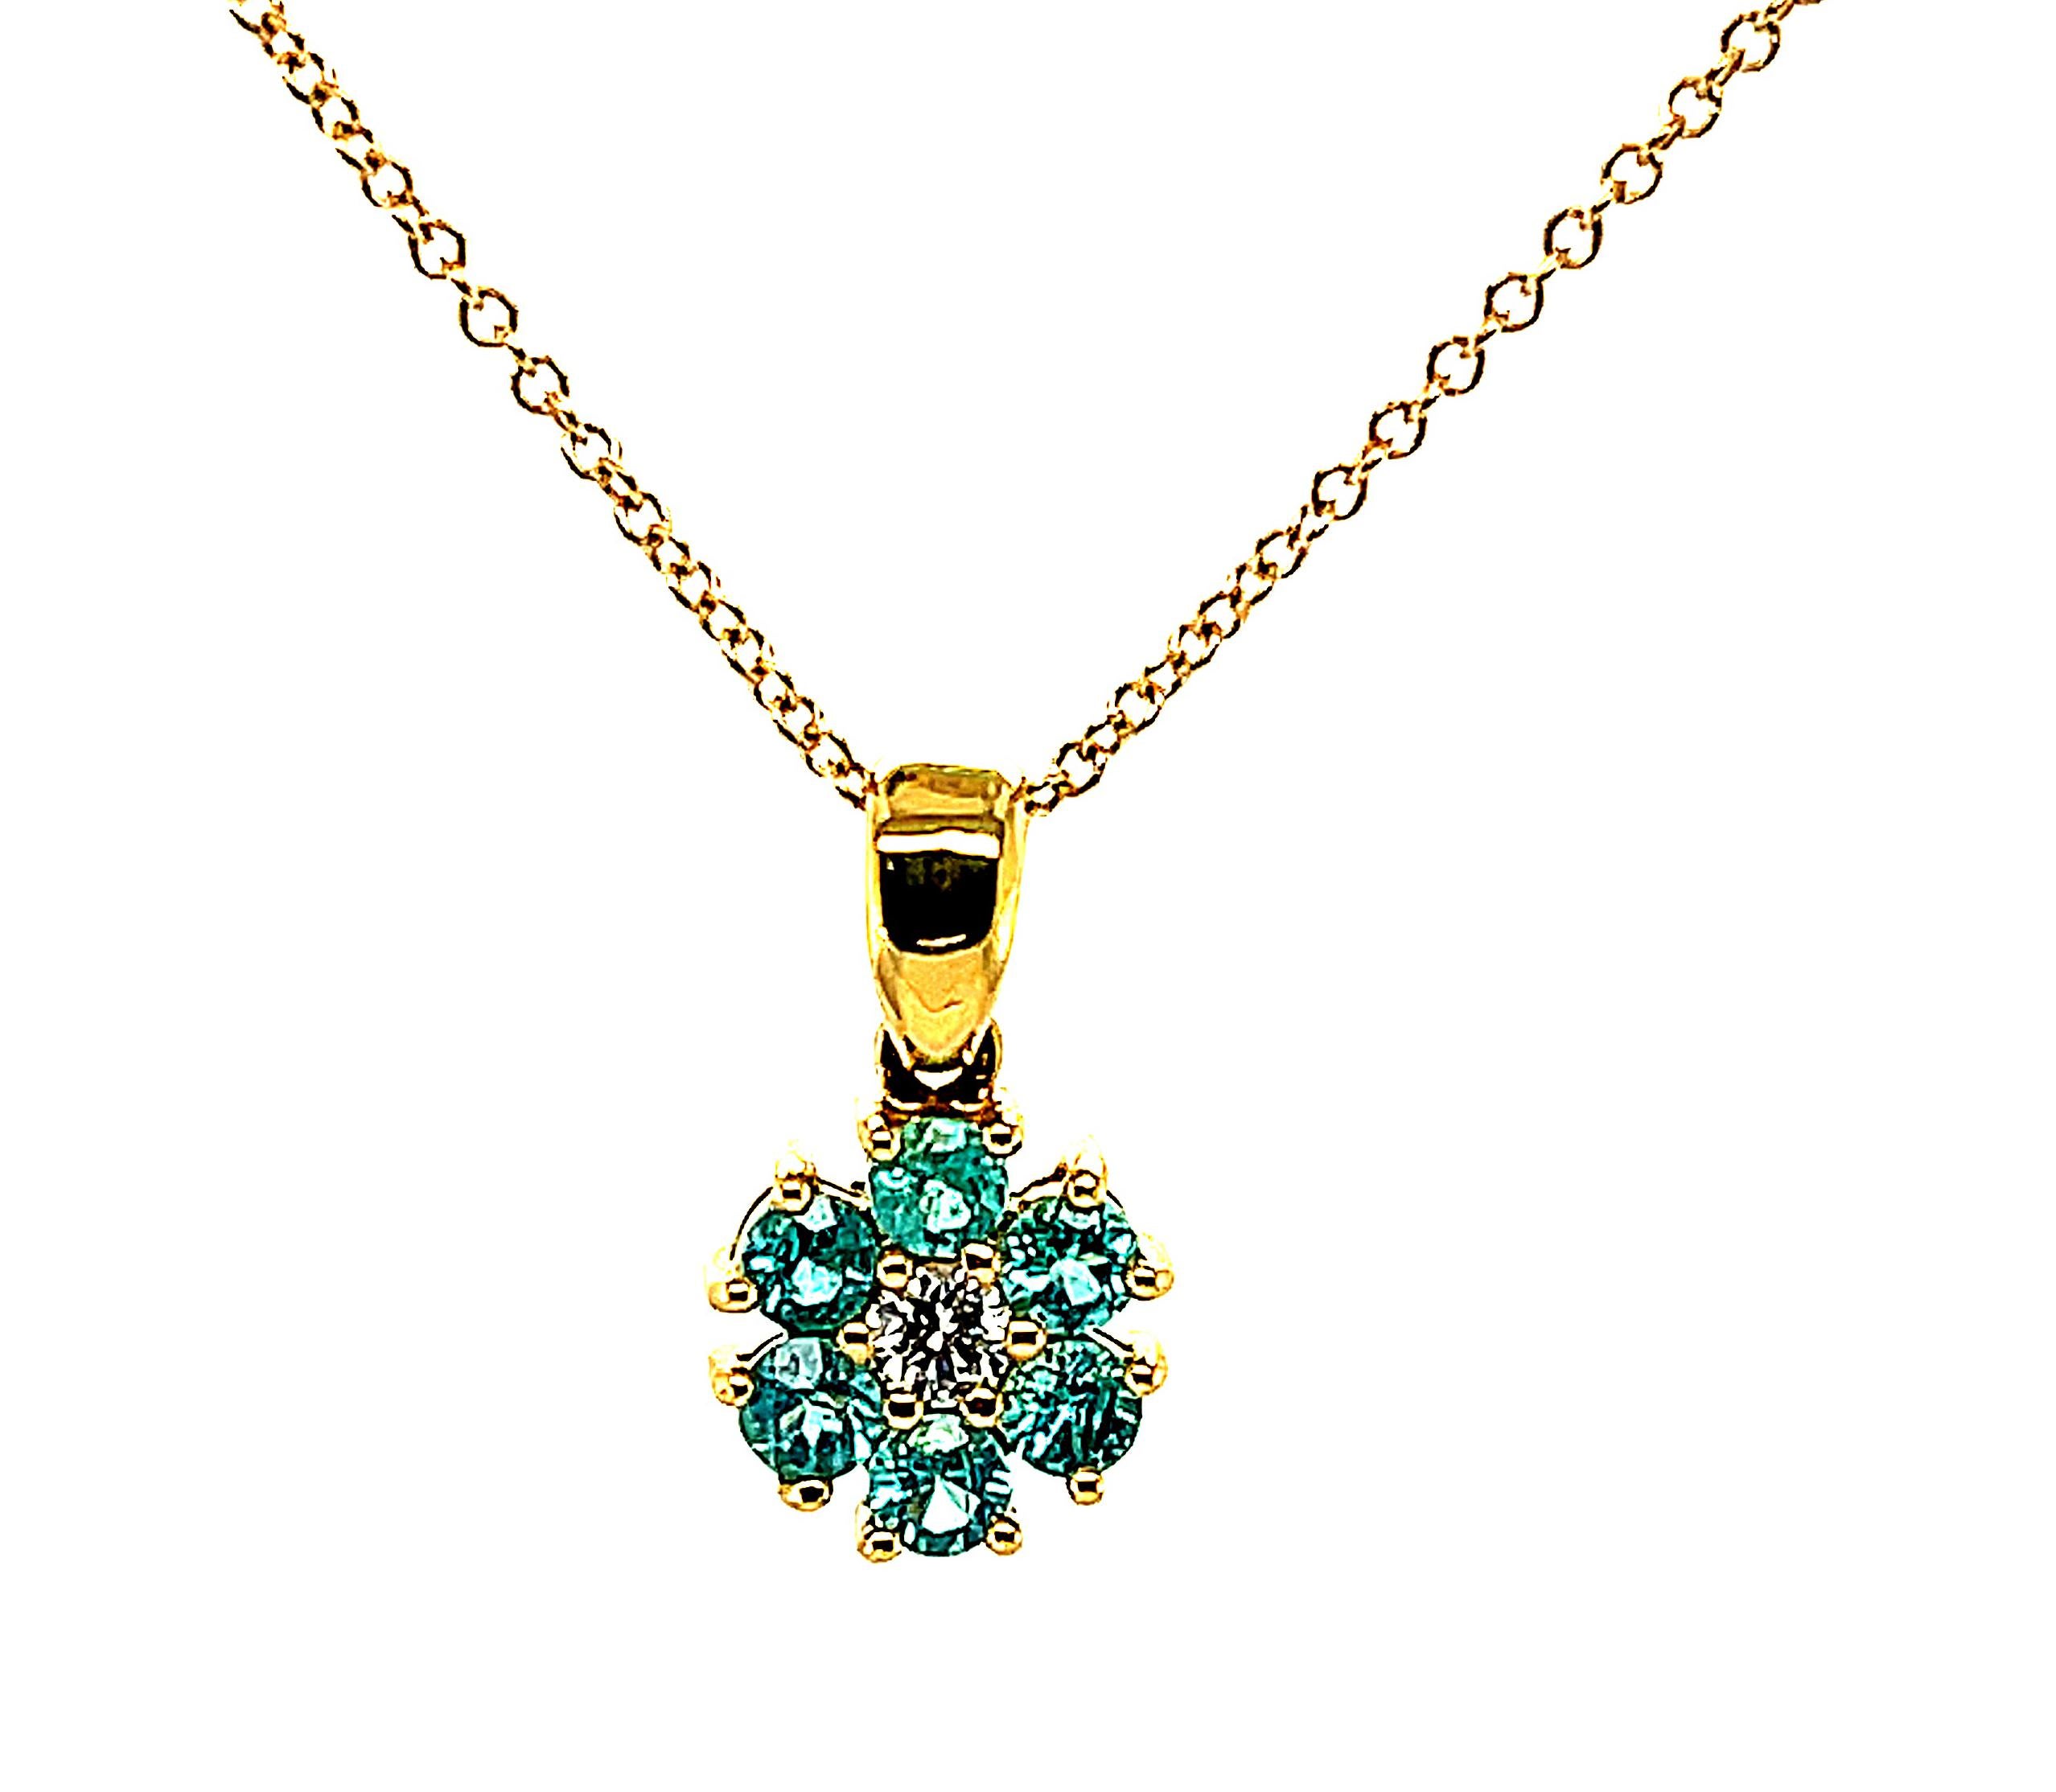 This delicate 18k yellow gold floral pendant is set with six Paraiba tourmalines with striking peacock blue color! Paraiba tourmalines are extremely rare, as they contain copper and manganese which give this variety their wonderfully vibrant and